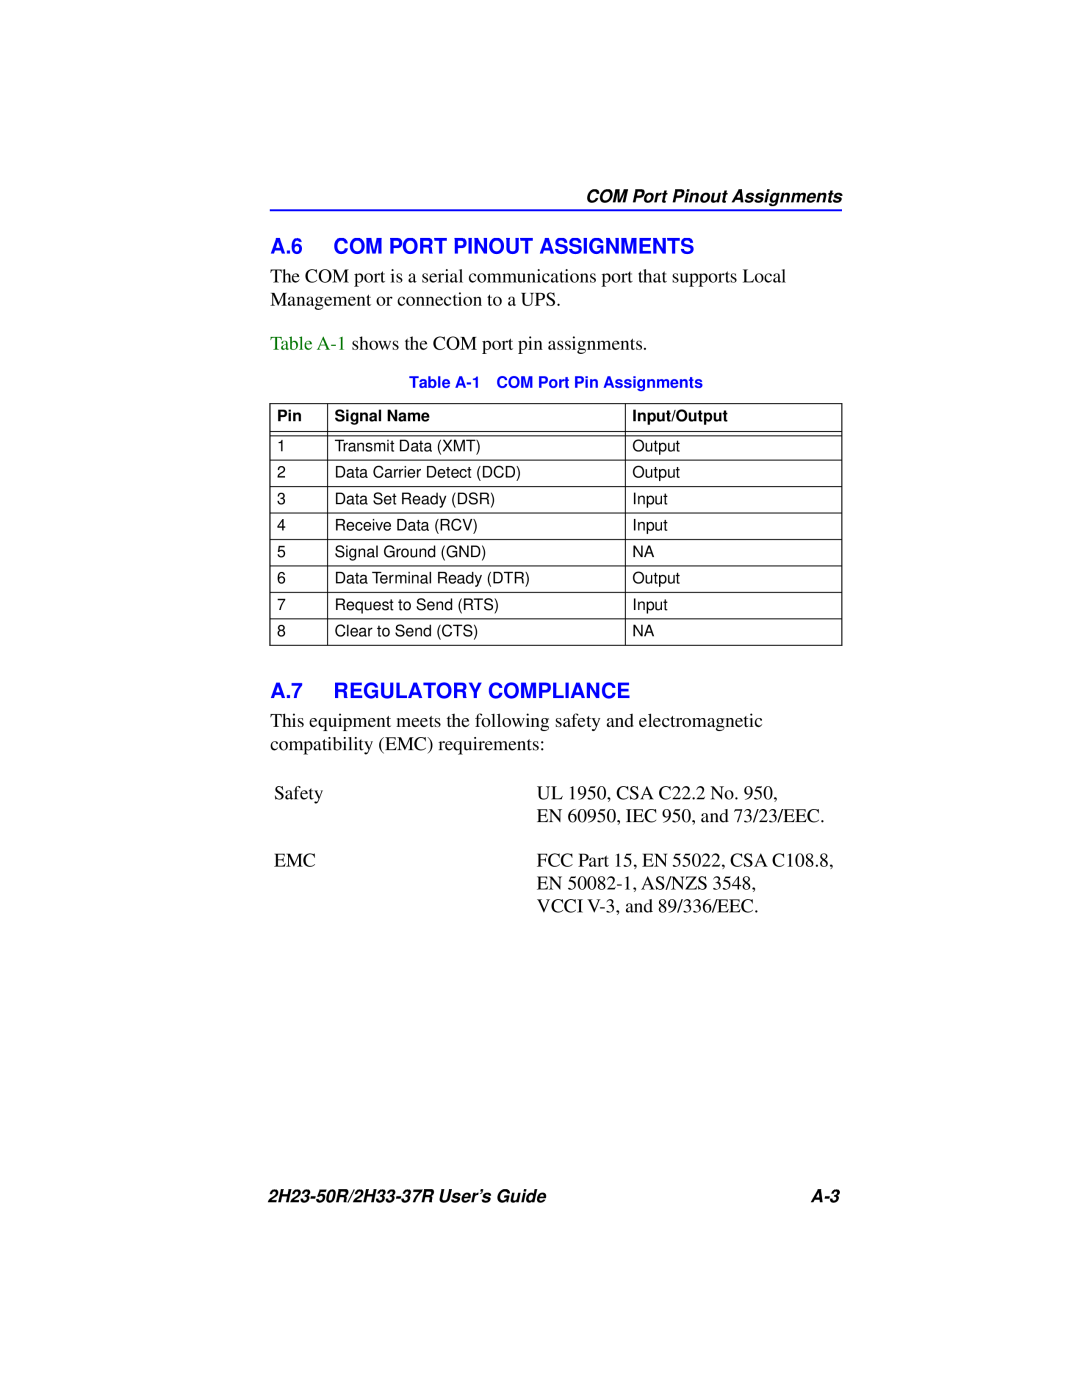 Cabletron Systems 2H23-50R, 2H33-37R manual A.6 COM PORT PINOUT ASSIGNMENTS, A.7 REGULATORY COMPLIANCE 